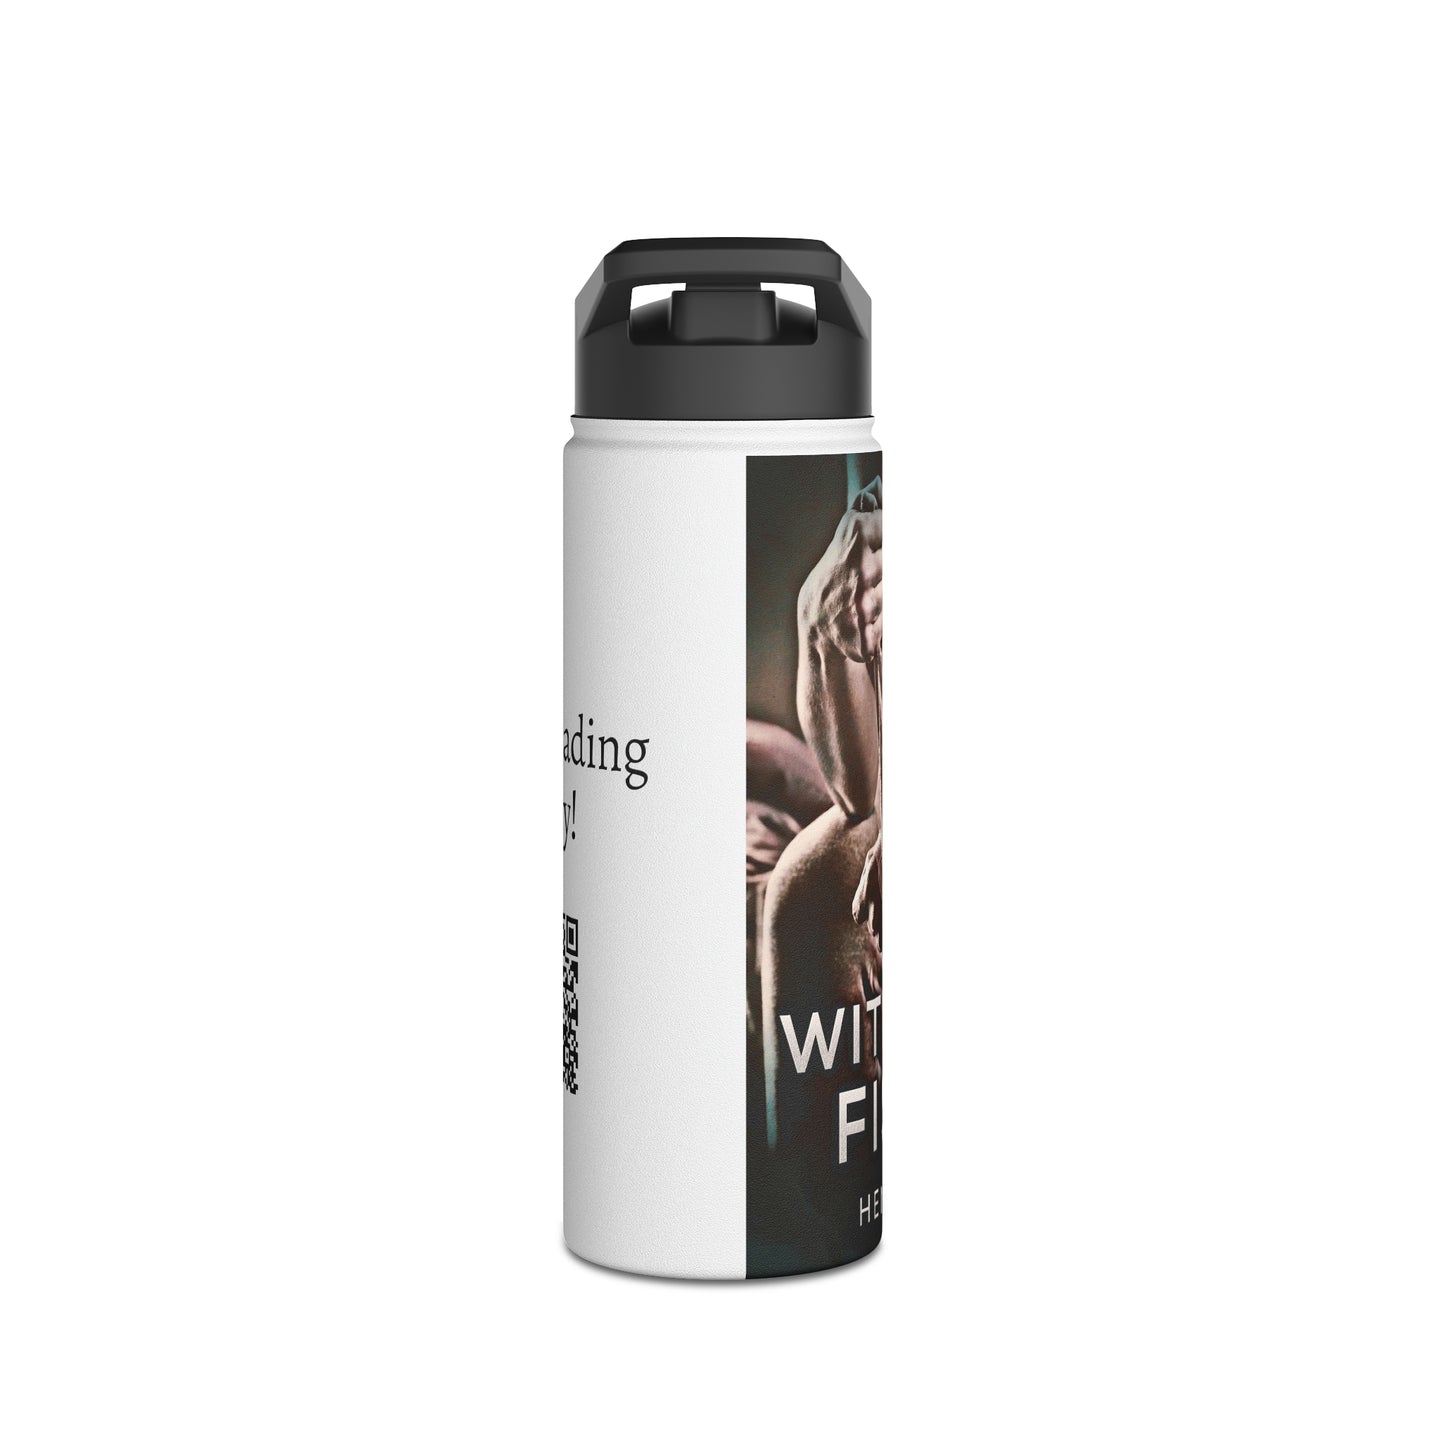 With Her Fists - Stainless Steel Water Bottle